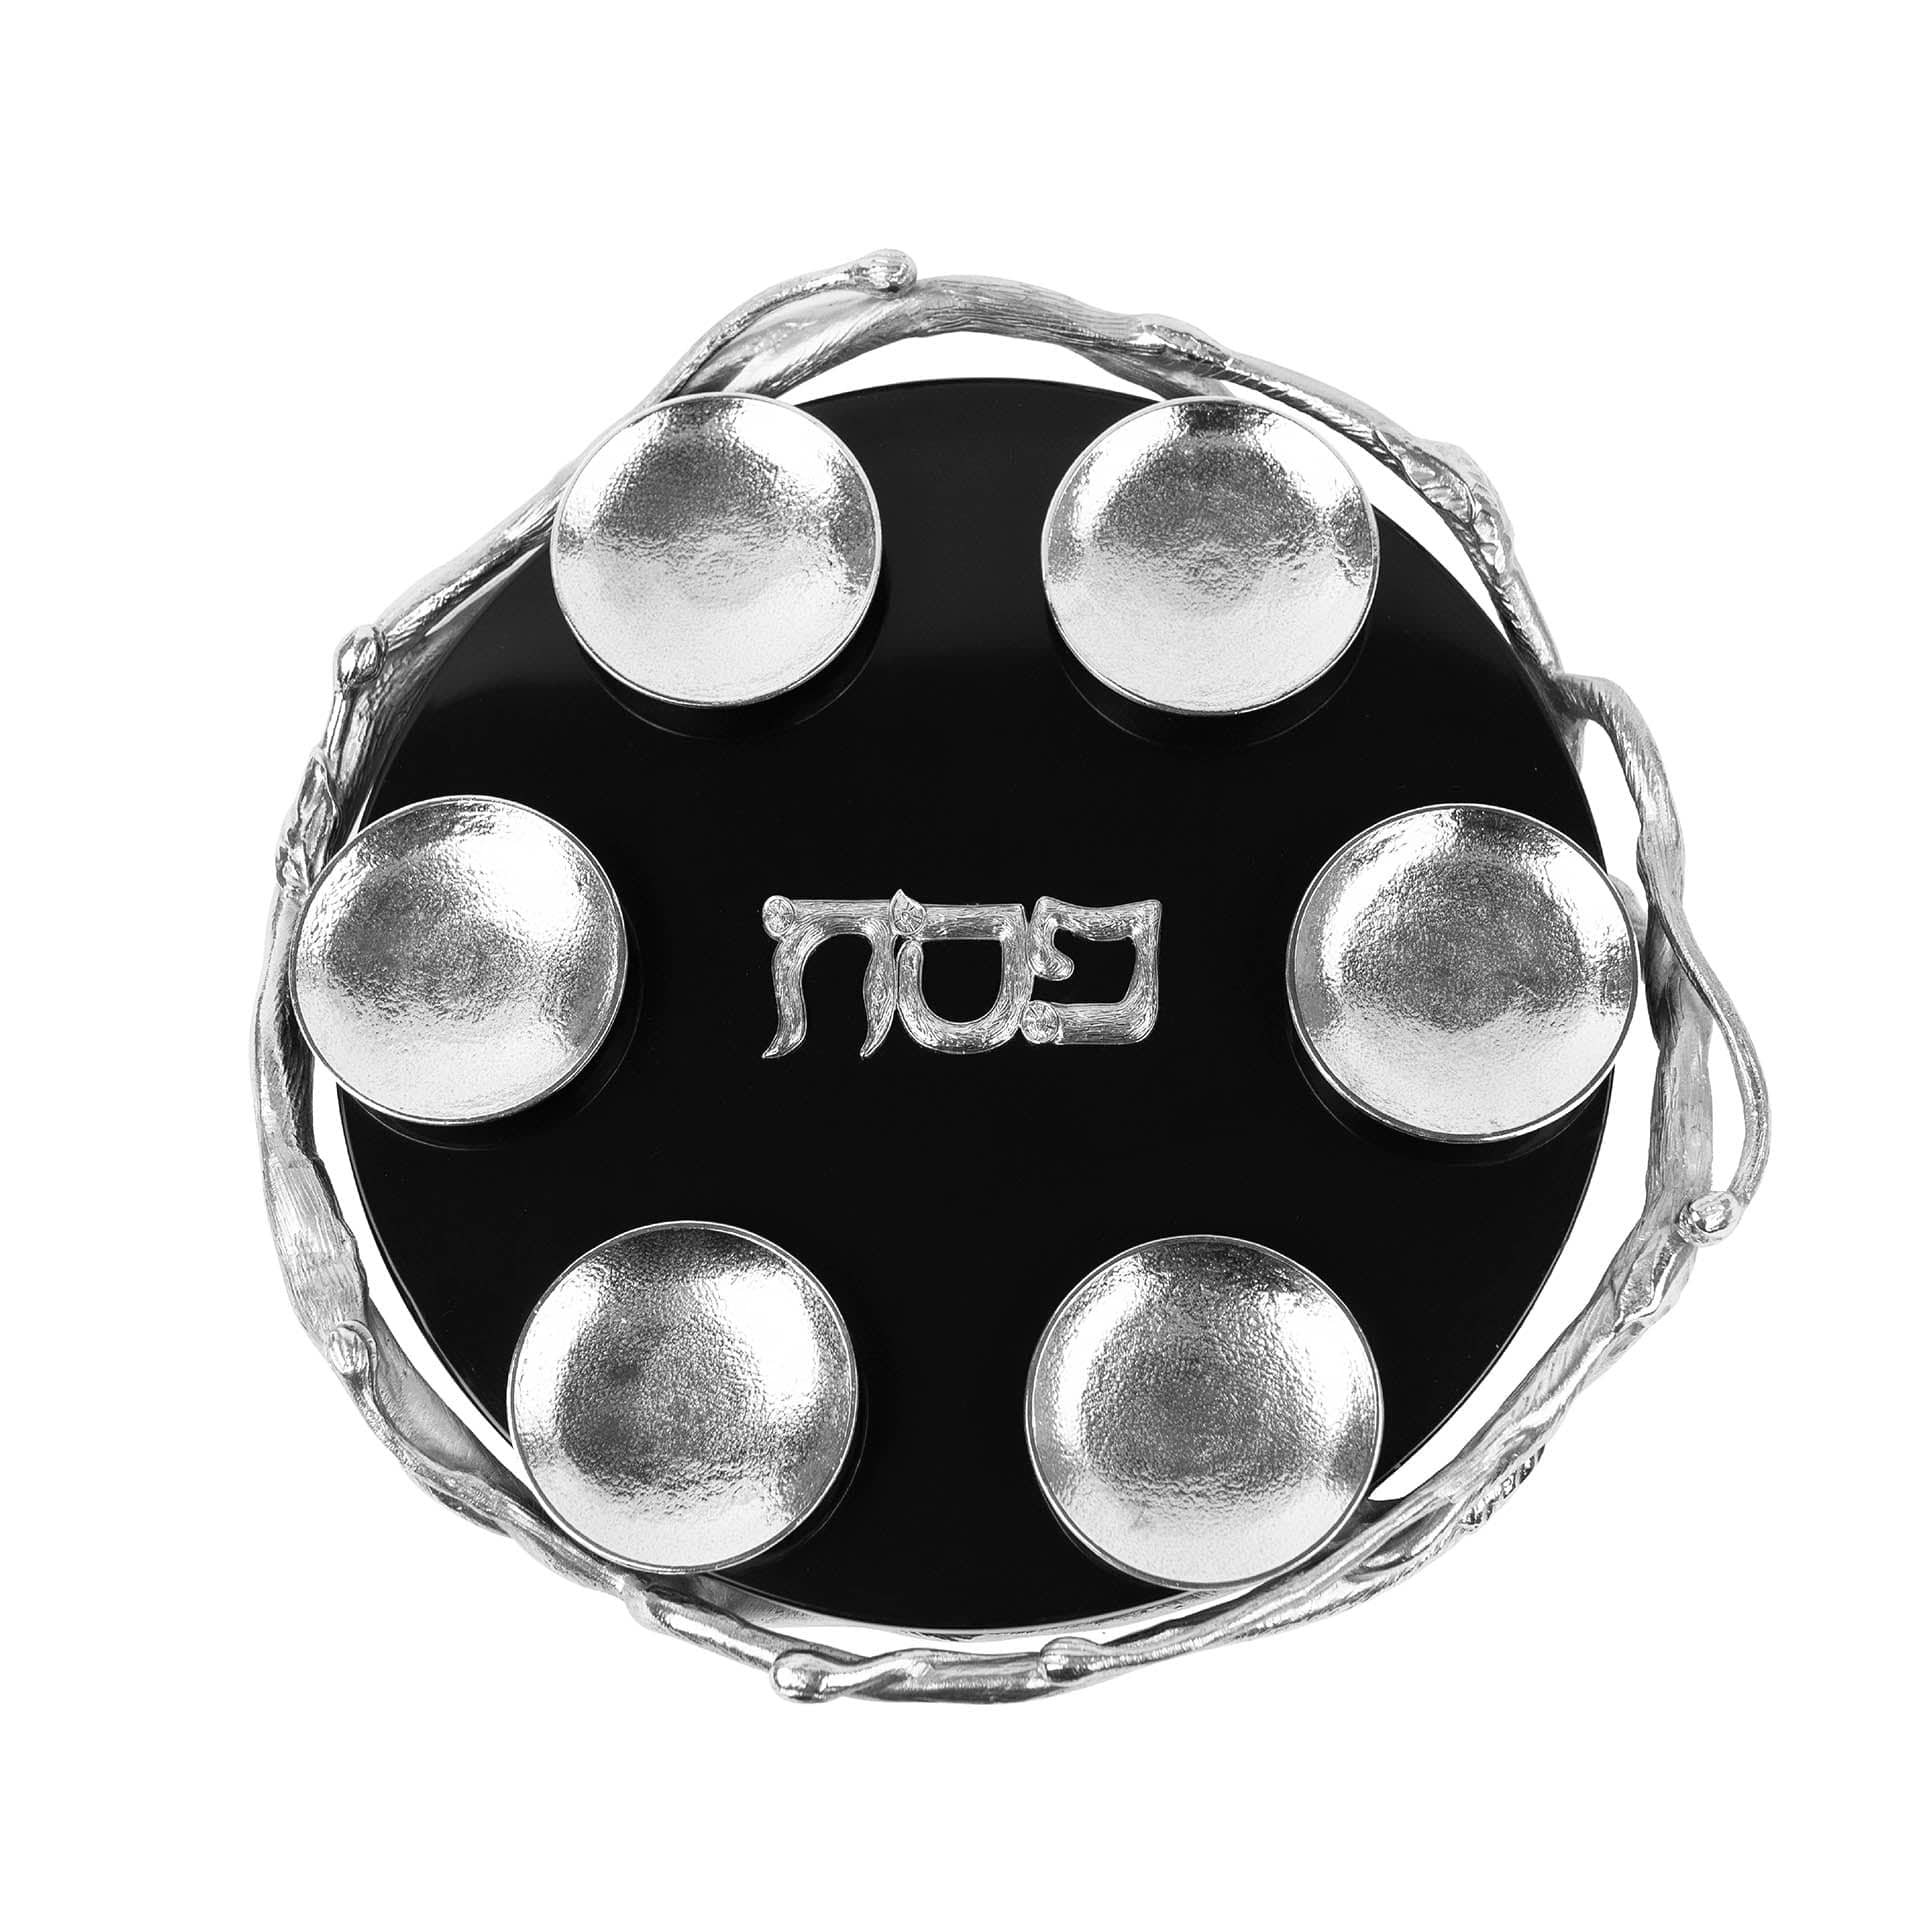 Quest Seder Plates Black and Silver Marble Seder Plate